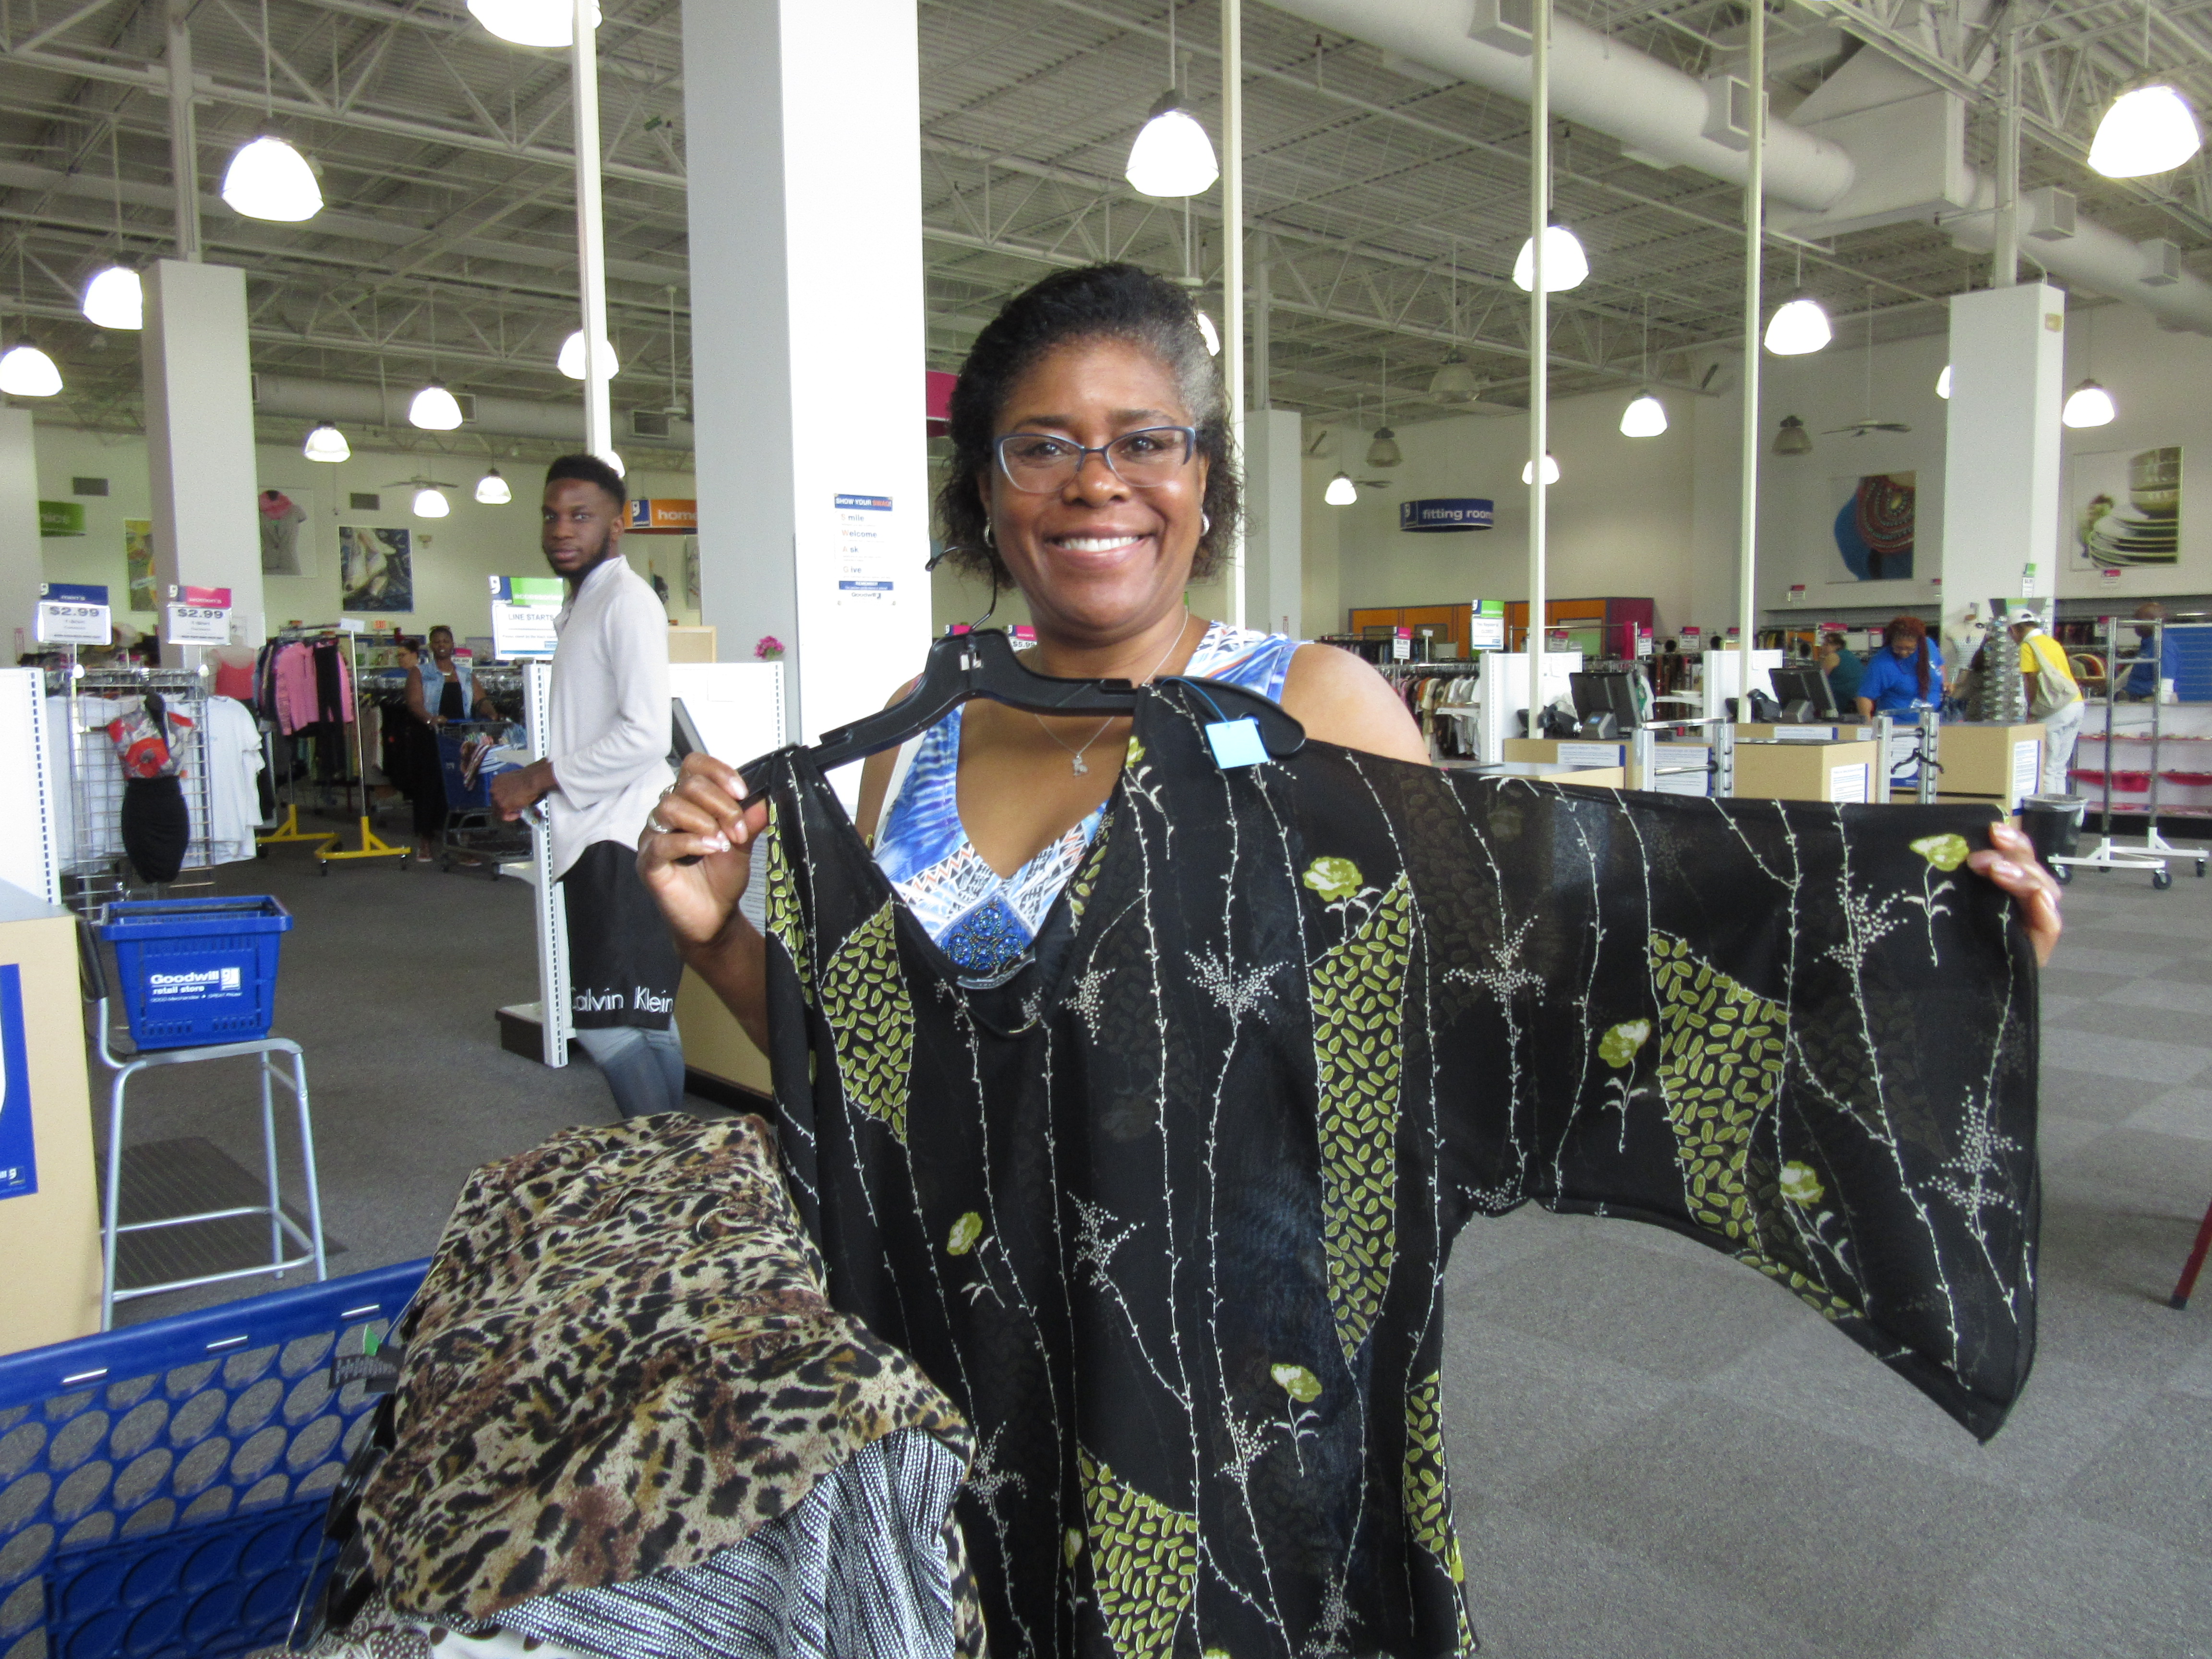 Meetup shopper poses with a blouse at the Bowie, MD Goodwill